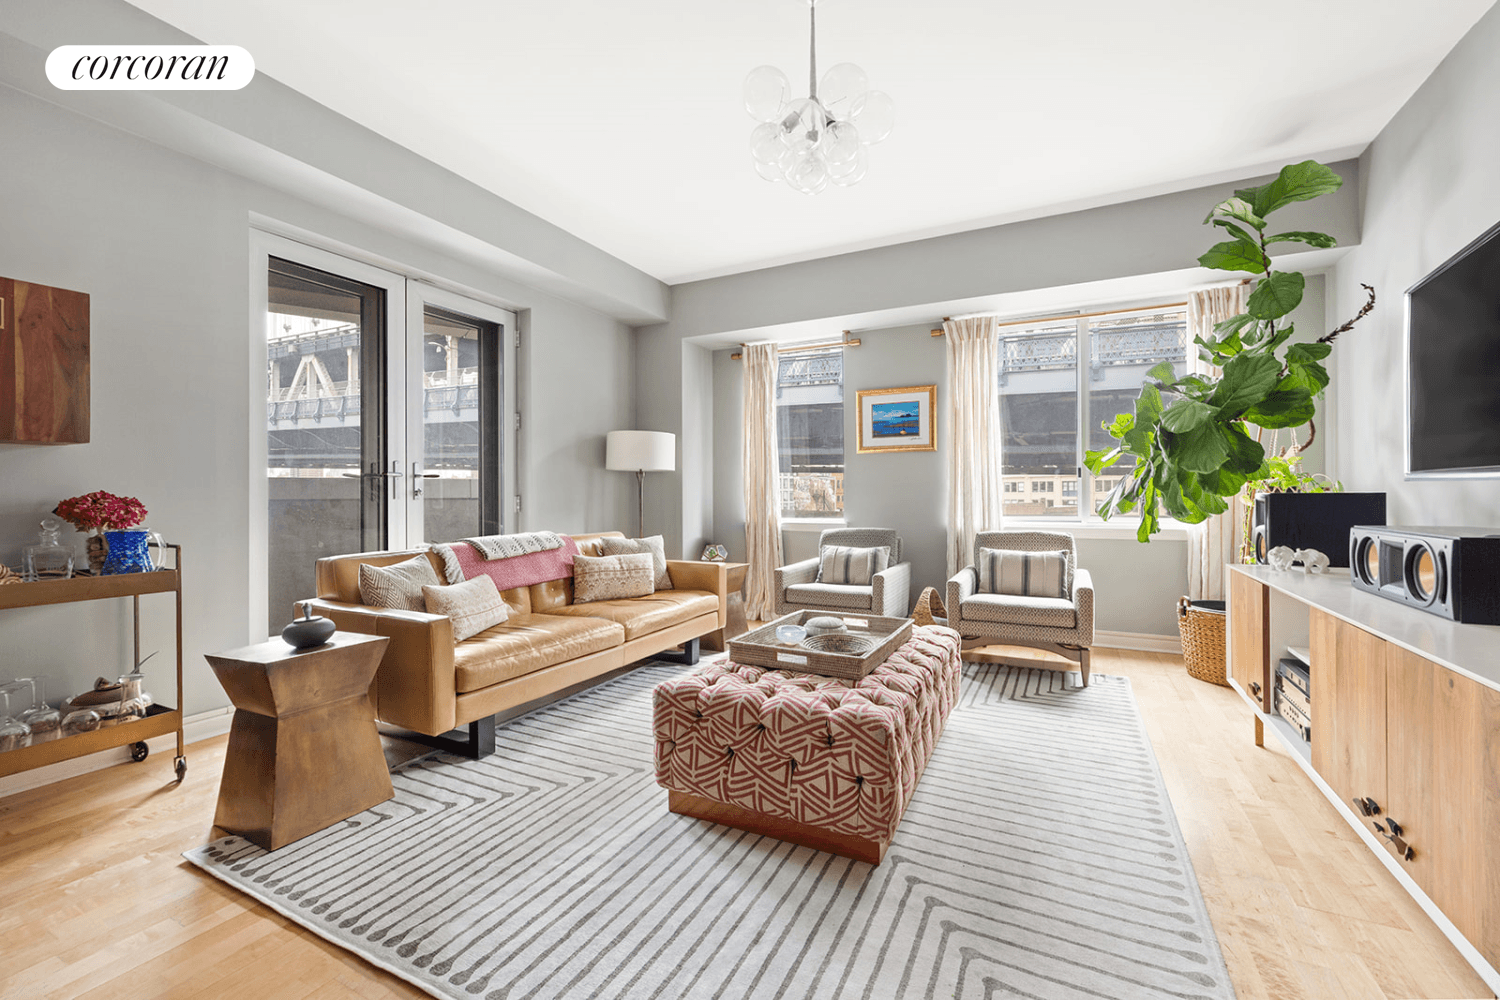 Nestled in the heart of DUMBO on a charming cobblestone street, around the corner from the waterfront and Brooklyn Bridge Park, this fantastic 2 bedroom, 2 bathroom apartment is spacious ...